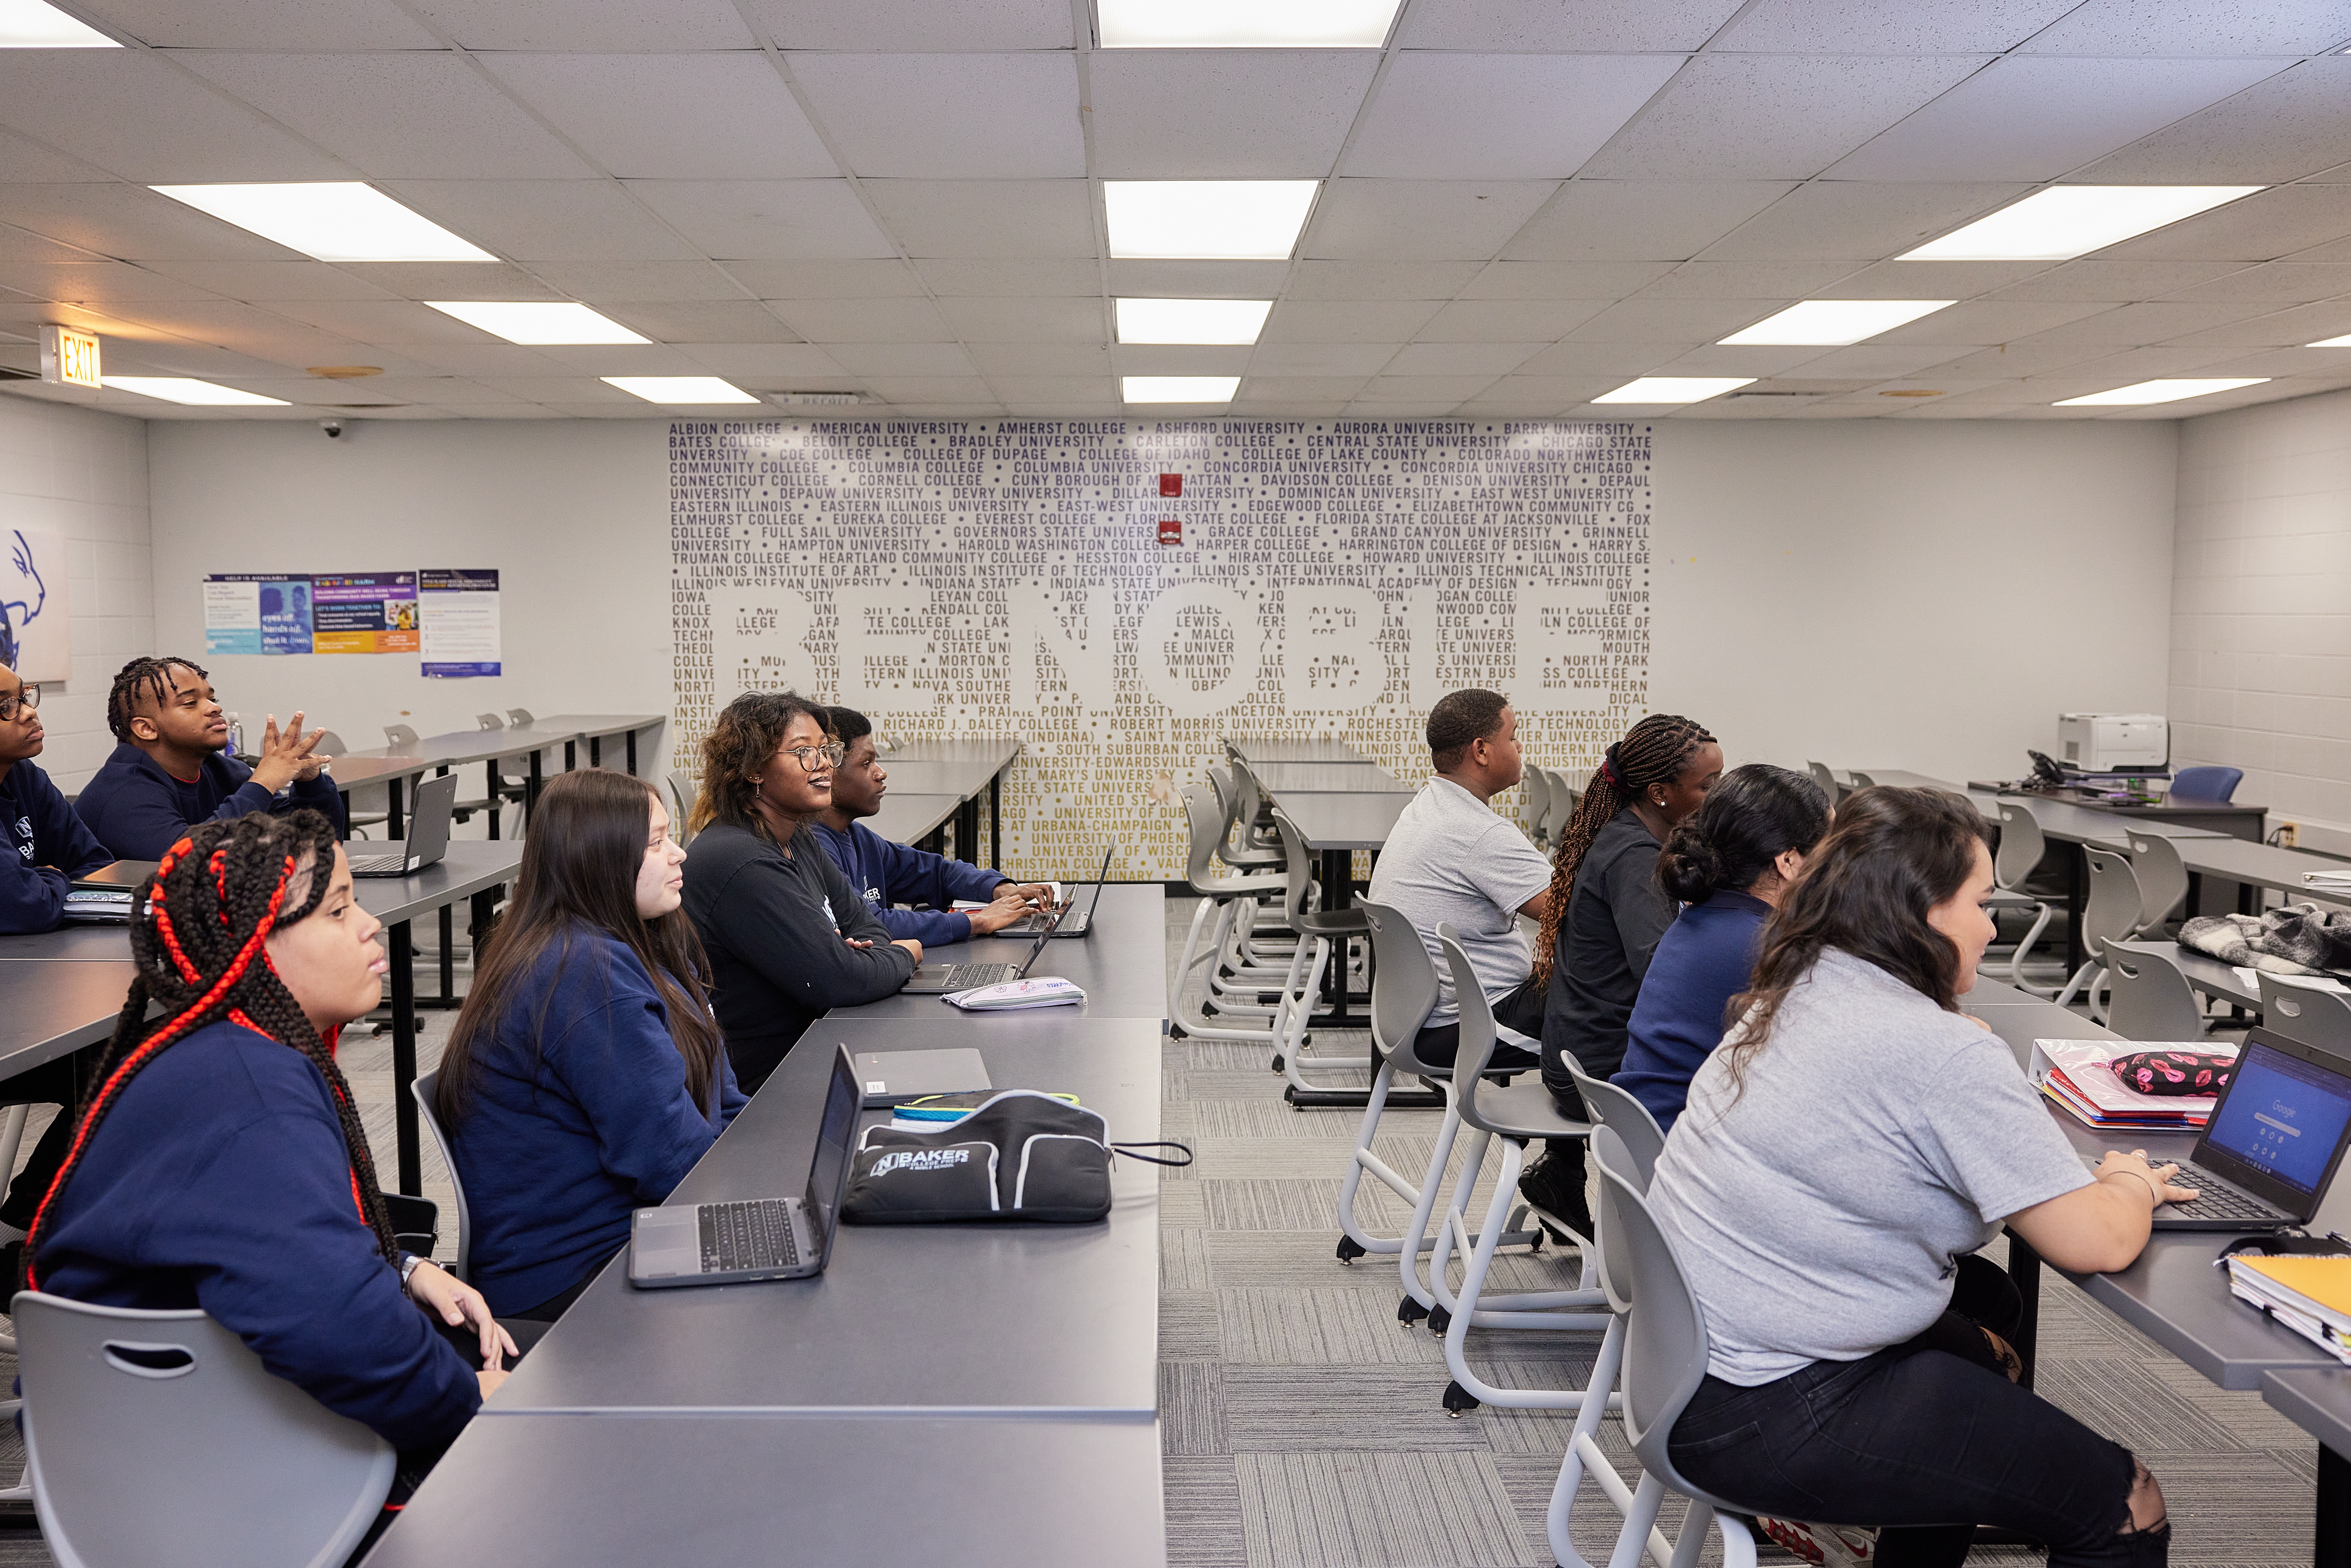 Photo shows a wide shot of a Noble Schools' classroom. Black and Brown students sit behind rows of long tables and look towards the front of the classroom, which is to the right. Behind them is a wall that is covered in sticker decals that list of names of several universities and colleges. In the middle of the stickers, there is white space that is cut out to read "Be Noble" in the midst of all the university names.